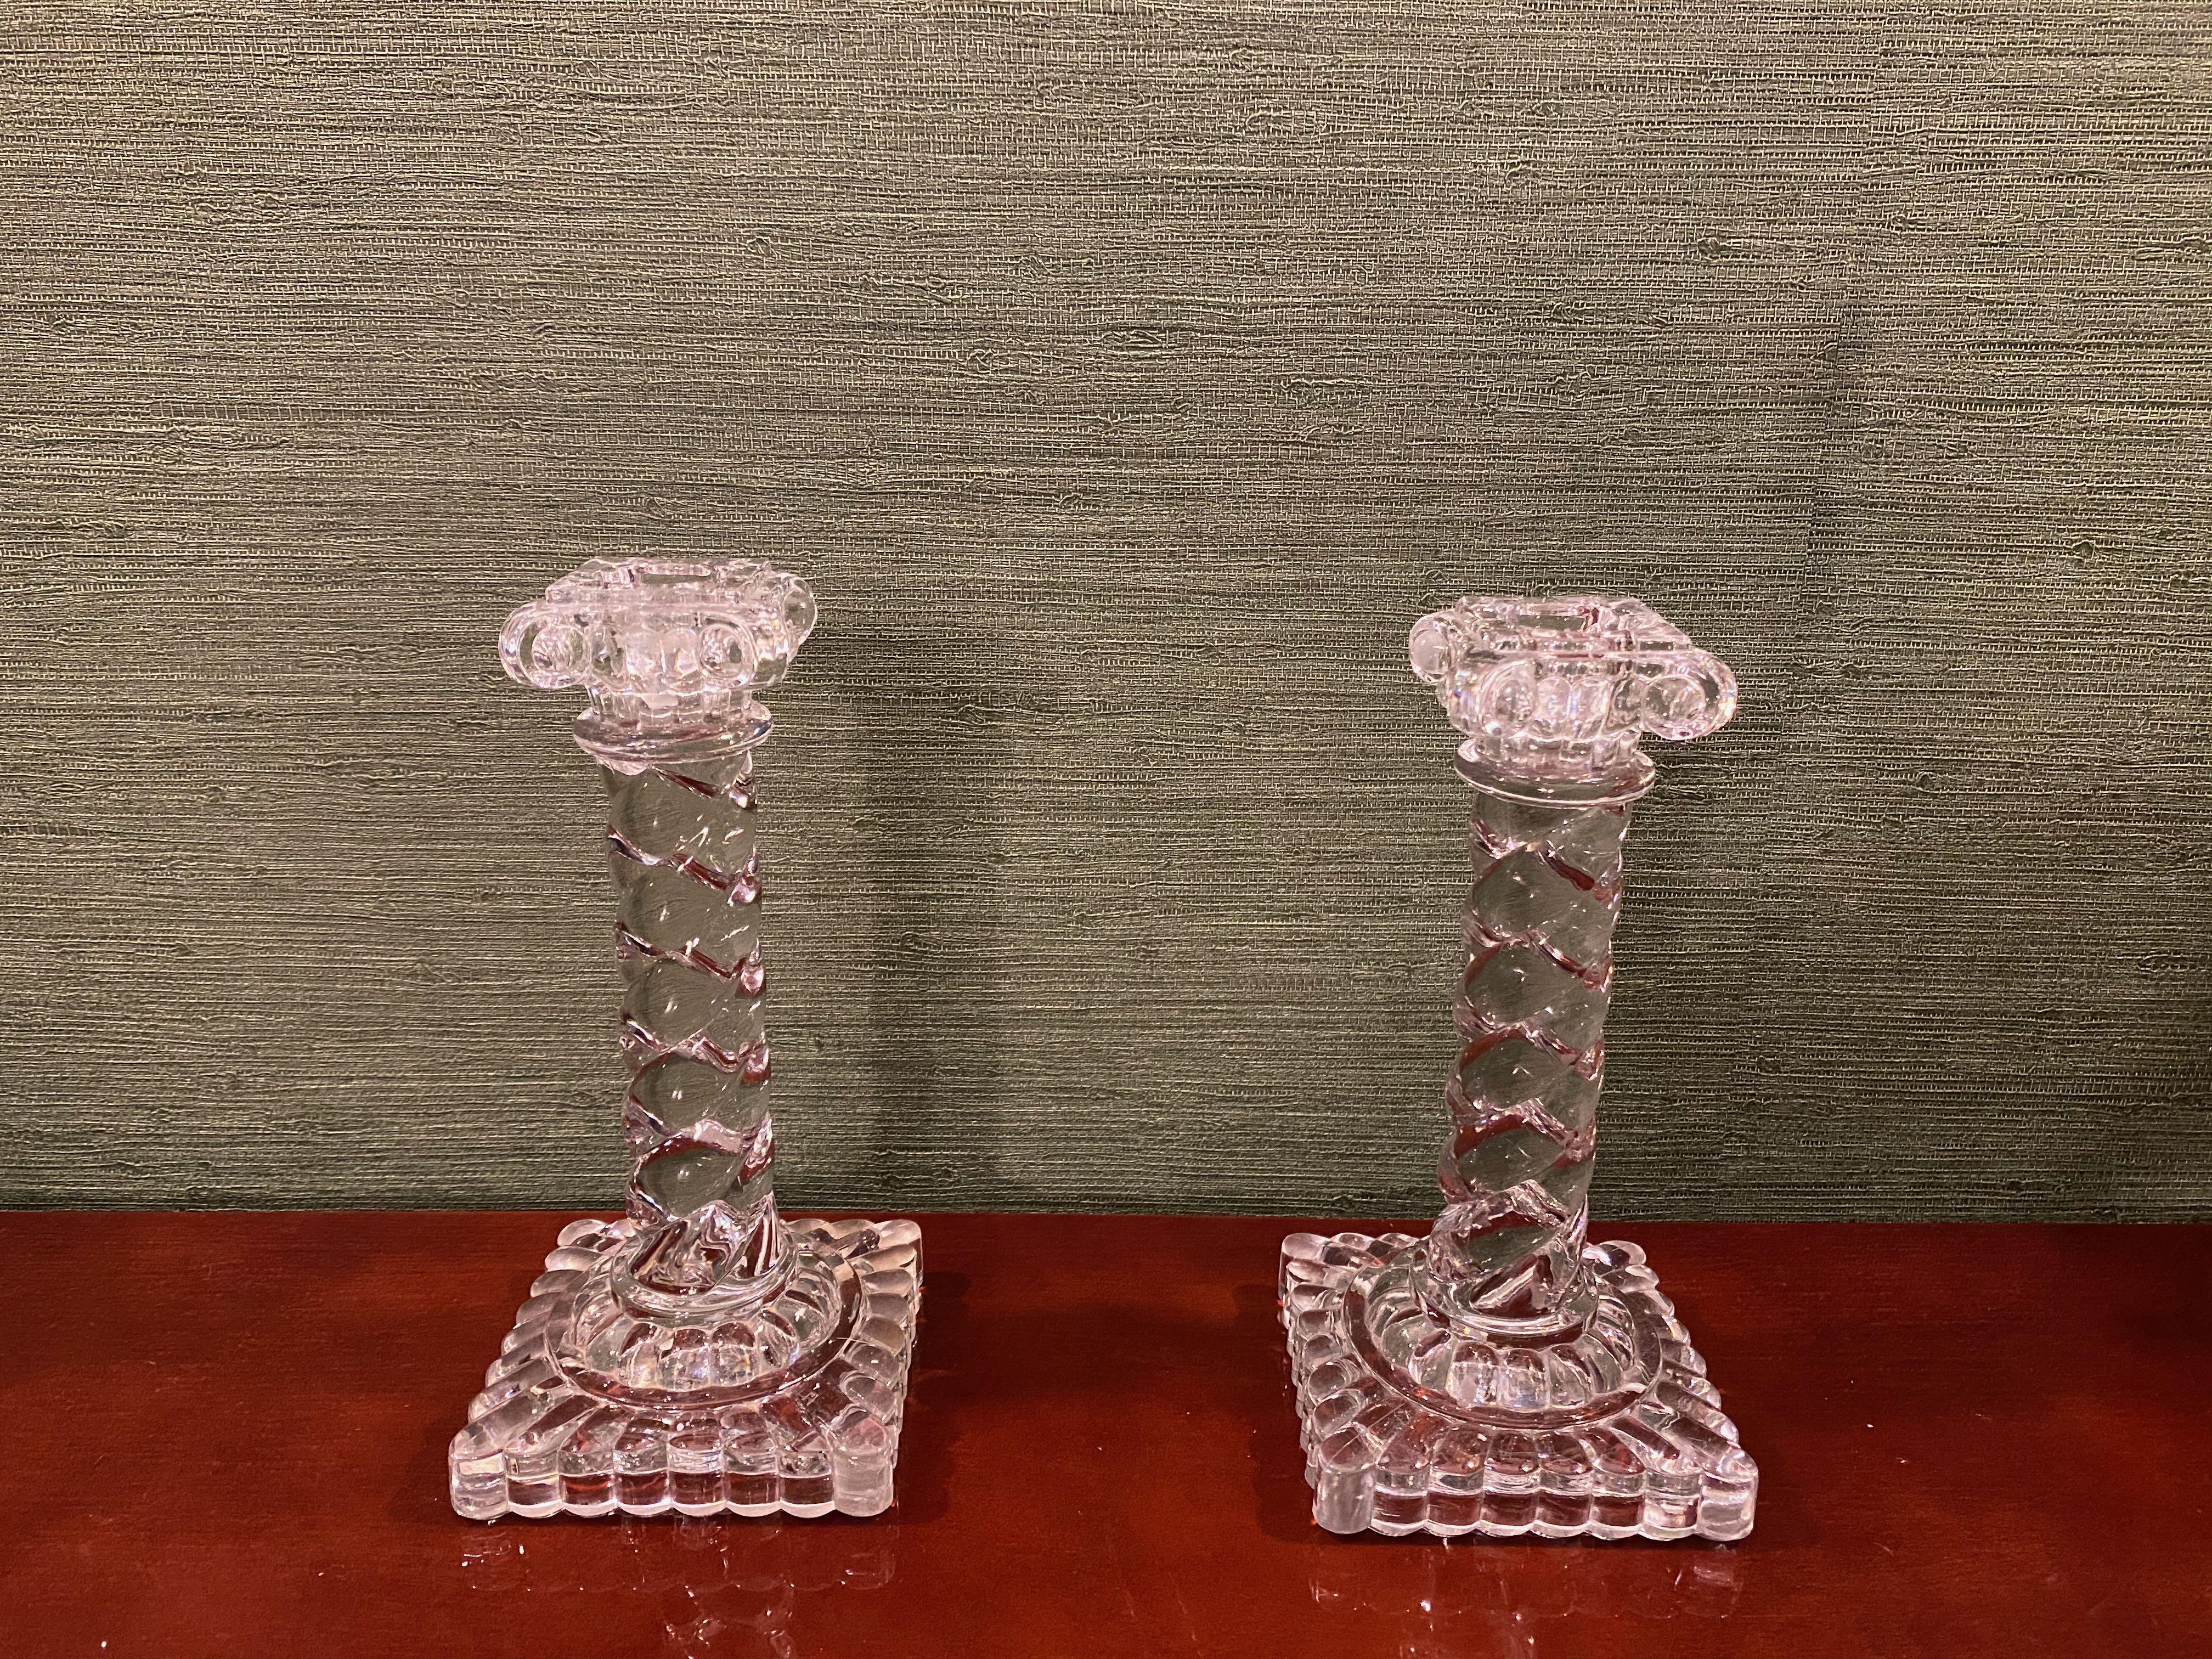 Matched pair of candlesticks

By Baccarat

Signed Baccarat Depose underneath

Crystal

Twisted columns.